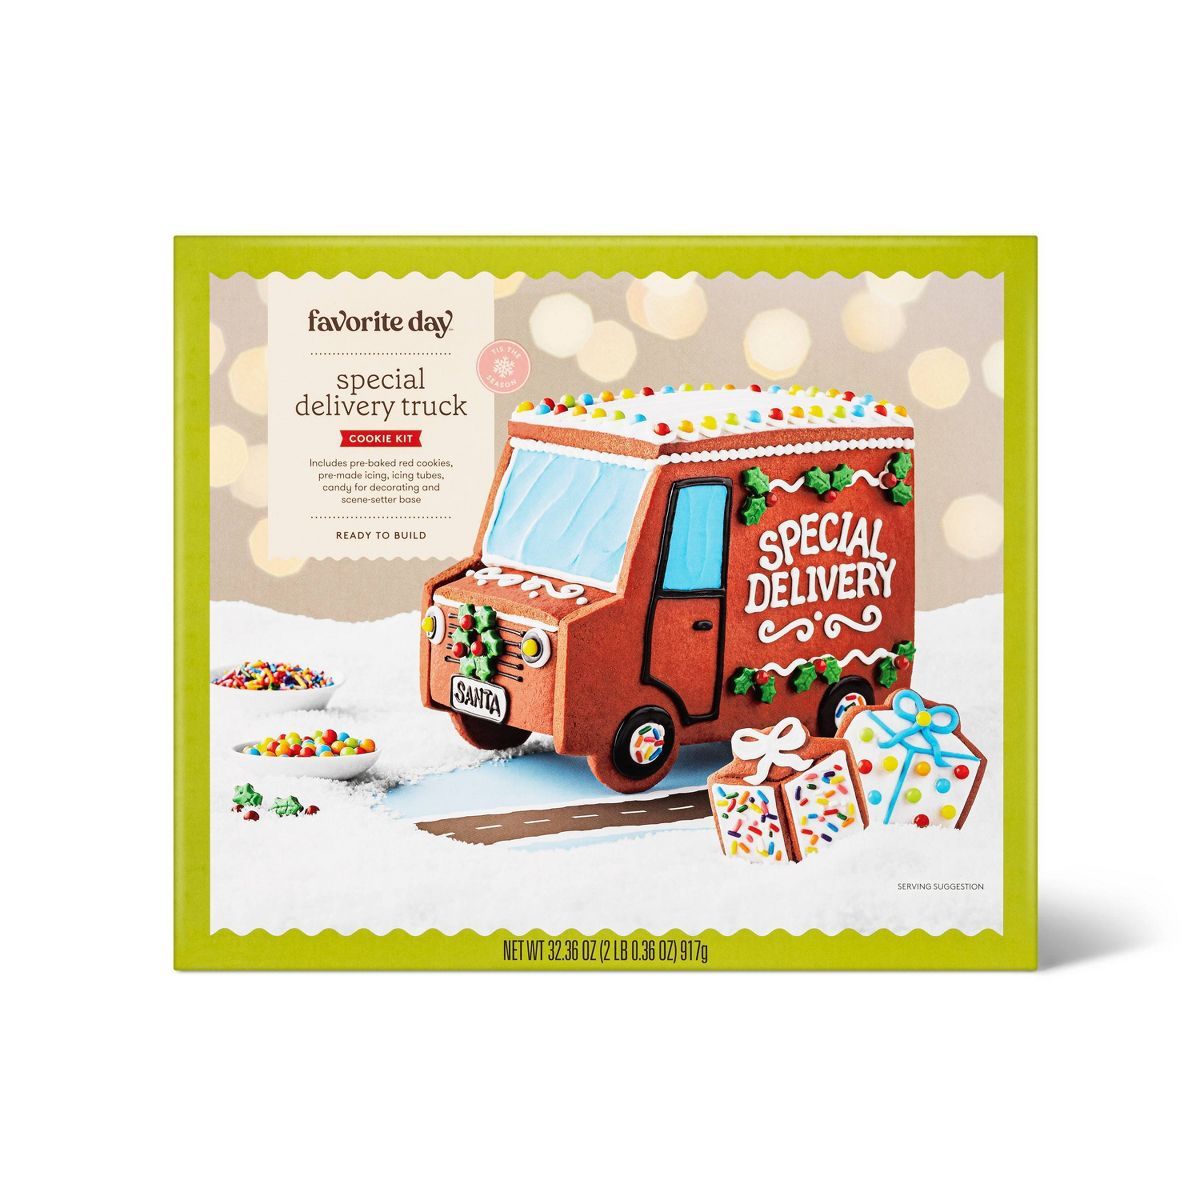 Holiday Special Delivery Truck Gingerbread House Kit - 35oz - Favorite Day™ | Target